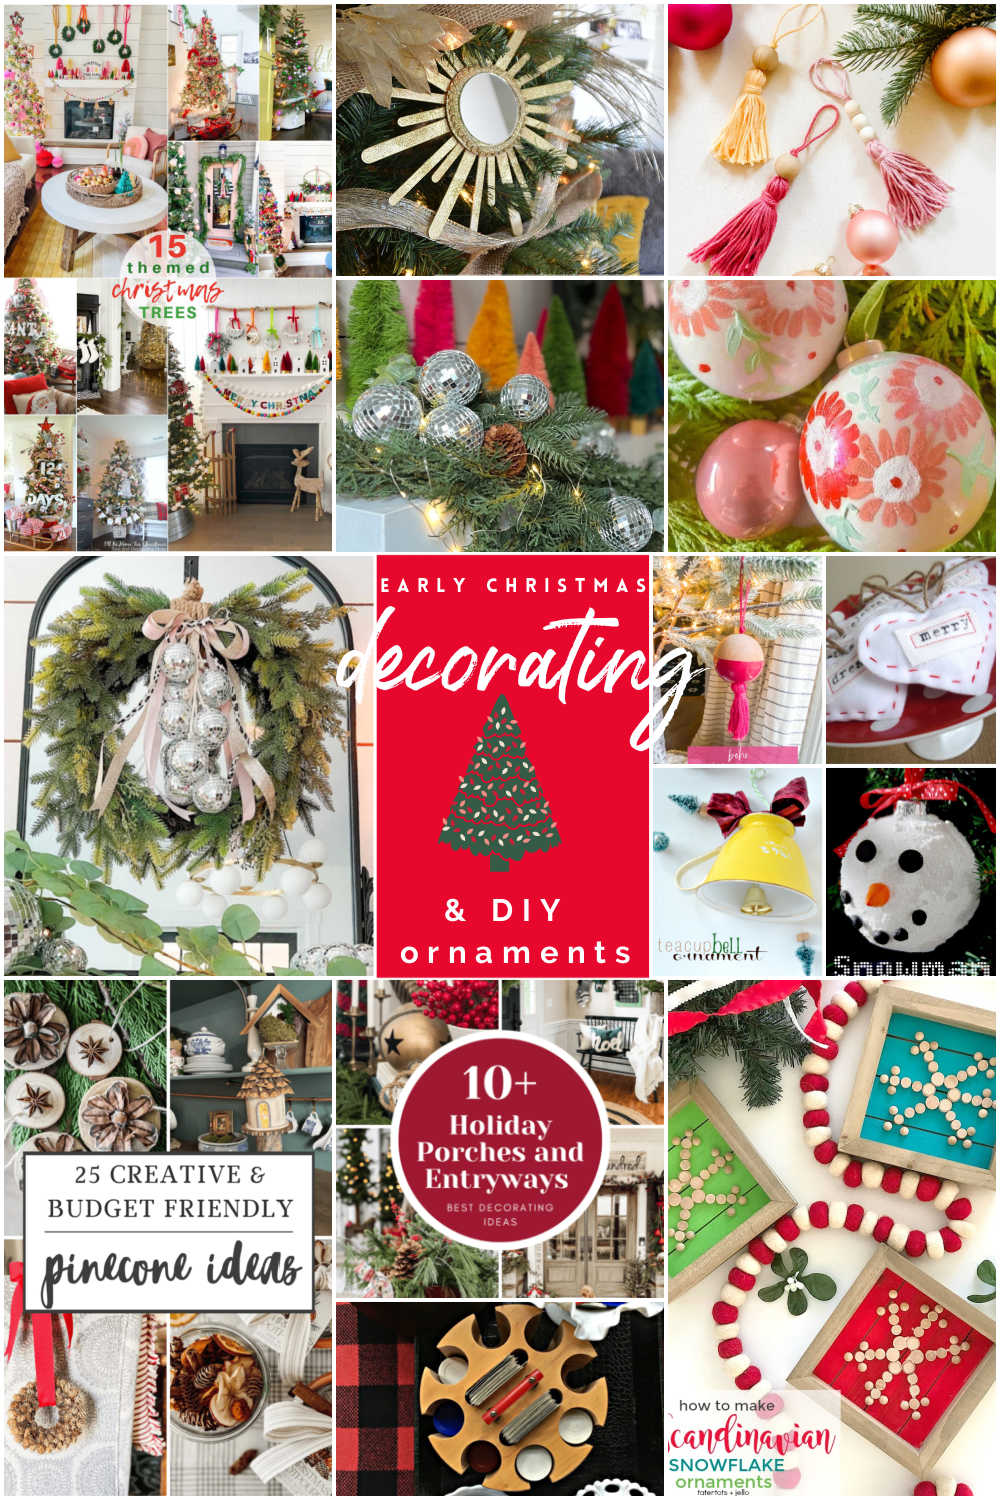 Embrace the Festive Spirit: Early Christmas Decorating Tips and DIY Ornaments for a beautiful and magical holiday!